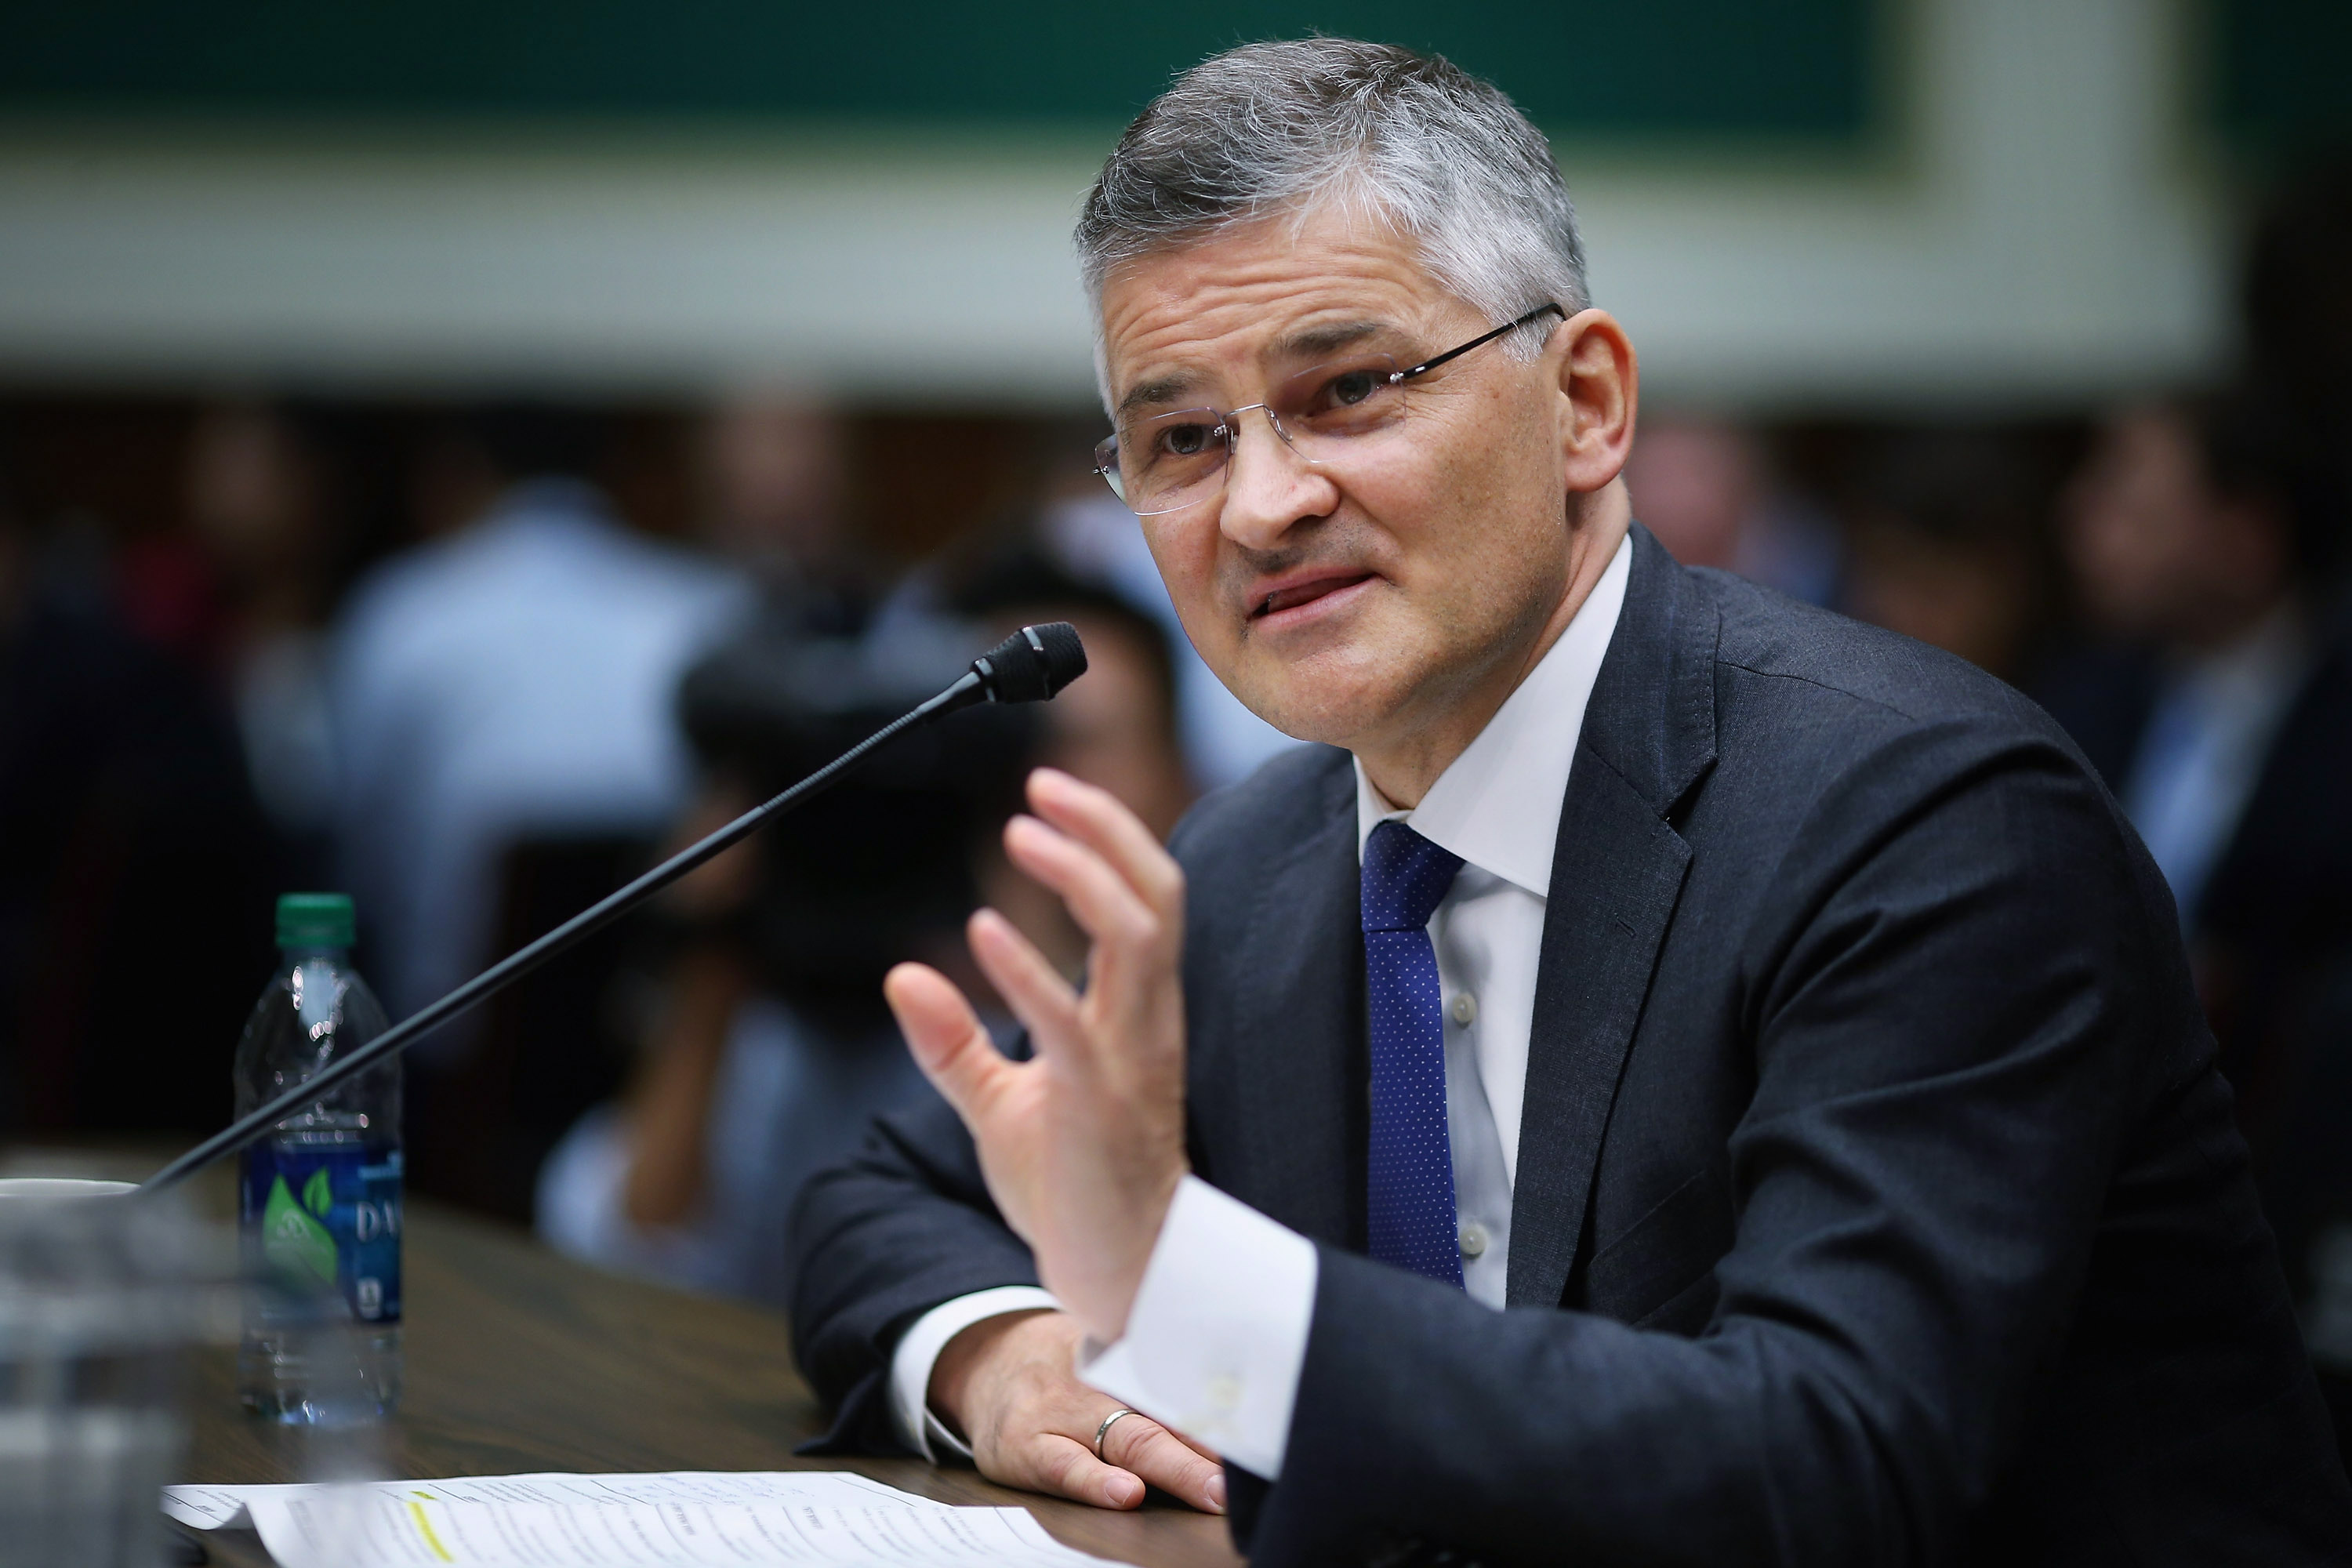 Volkswagen Group of America President and CEO Michael Horn testifies before the House Energy and Commerce Committee's Oversight and Investigations Subcommittee in the Rayburn House Office Building on Capitol Hill October 8, 2015 in Washington, D.C. (Chip Somodevilla&mdash;2015 Getty Images)